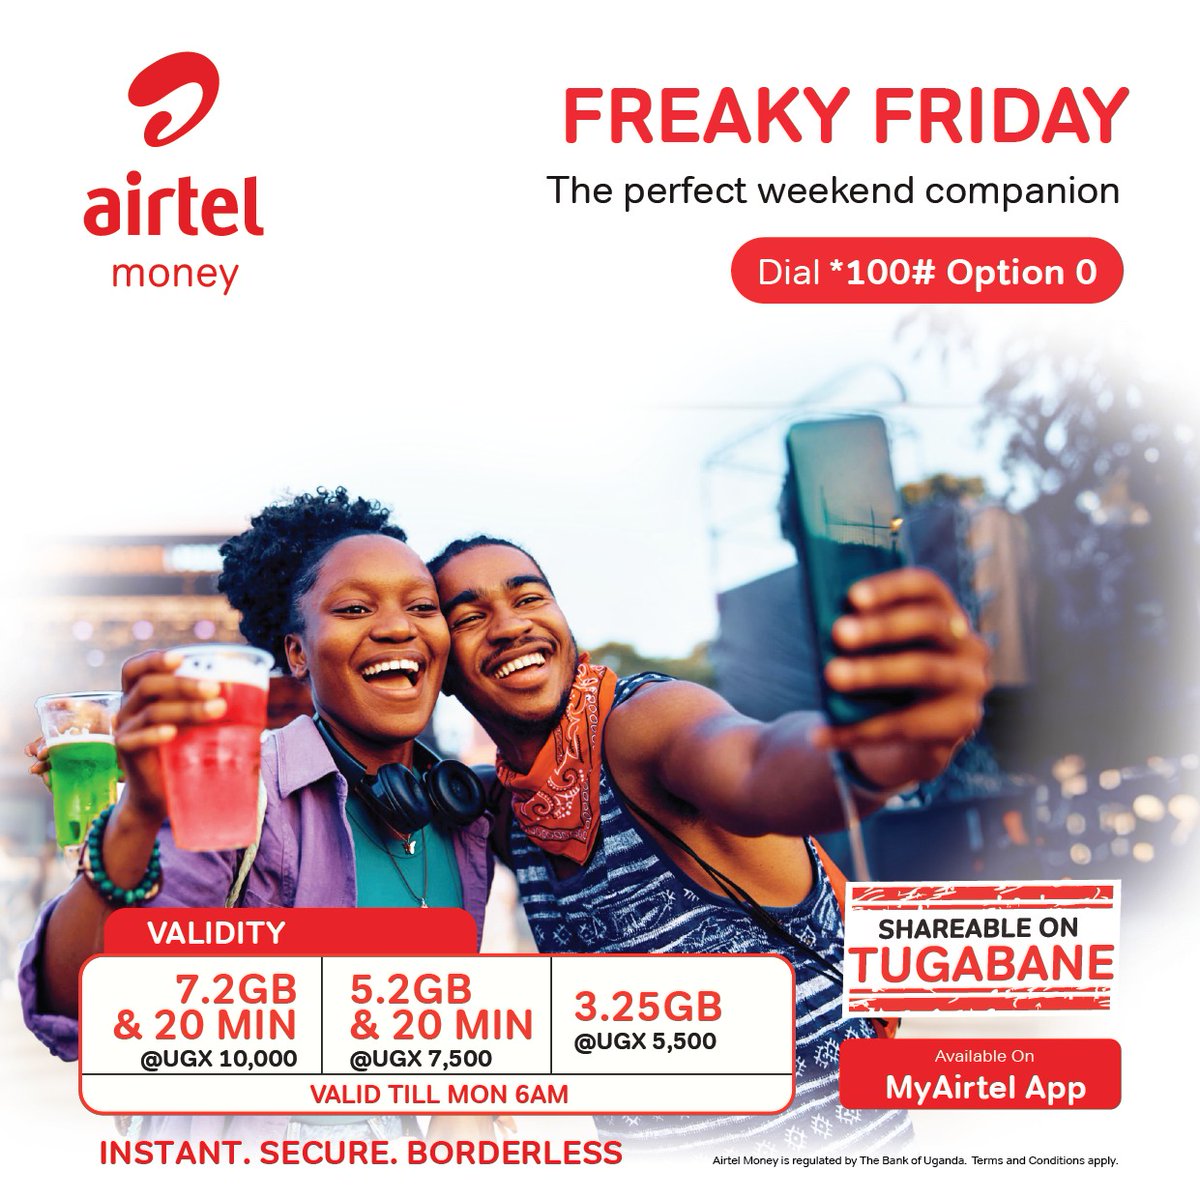 Enter the weekend in style by activating the #Freakyfriday bundle from @Airtel_Ug by dialing *100# and choose option 0 to activate.